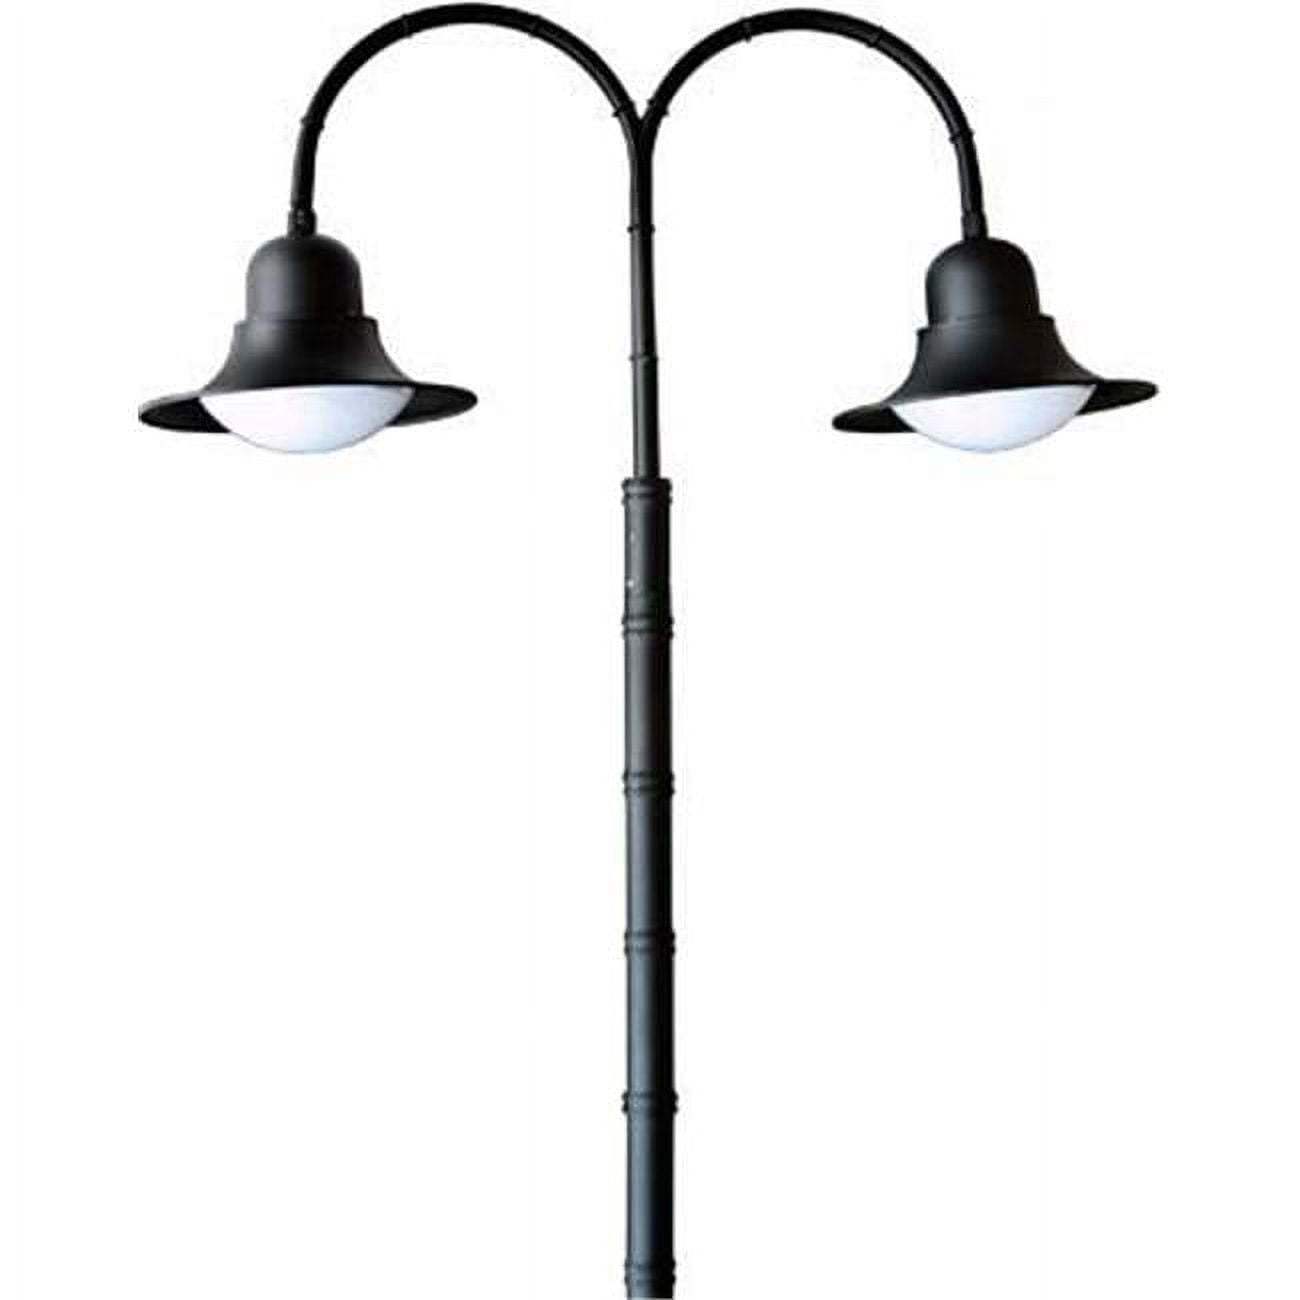 Picture of Dabmar Lighting GM624-B 70W 120V Powder Coated Cast Aluminum Post Top Light Fixture with 2x High Pressure Sodium Lamp, Black